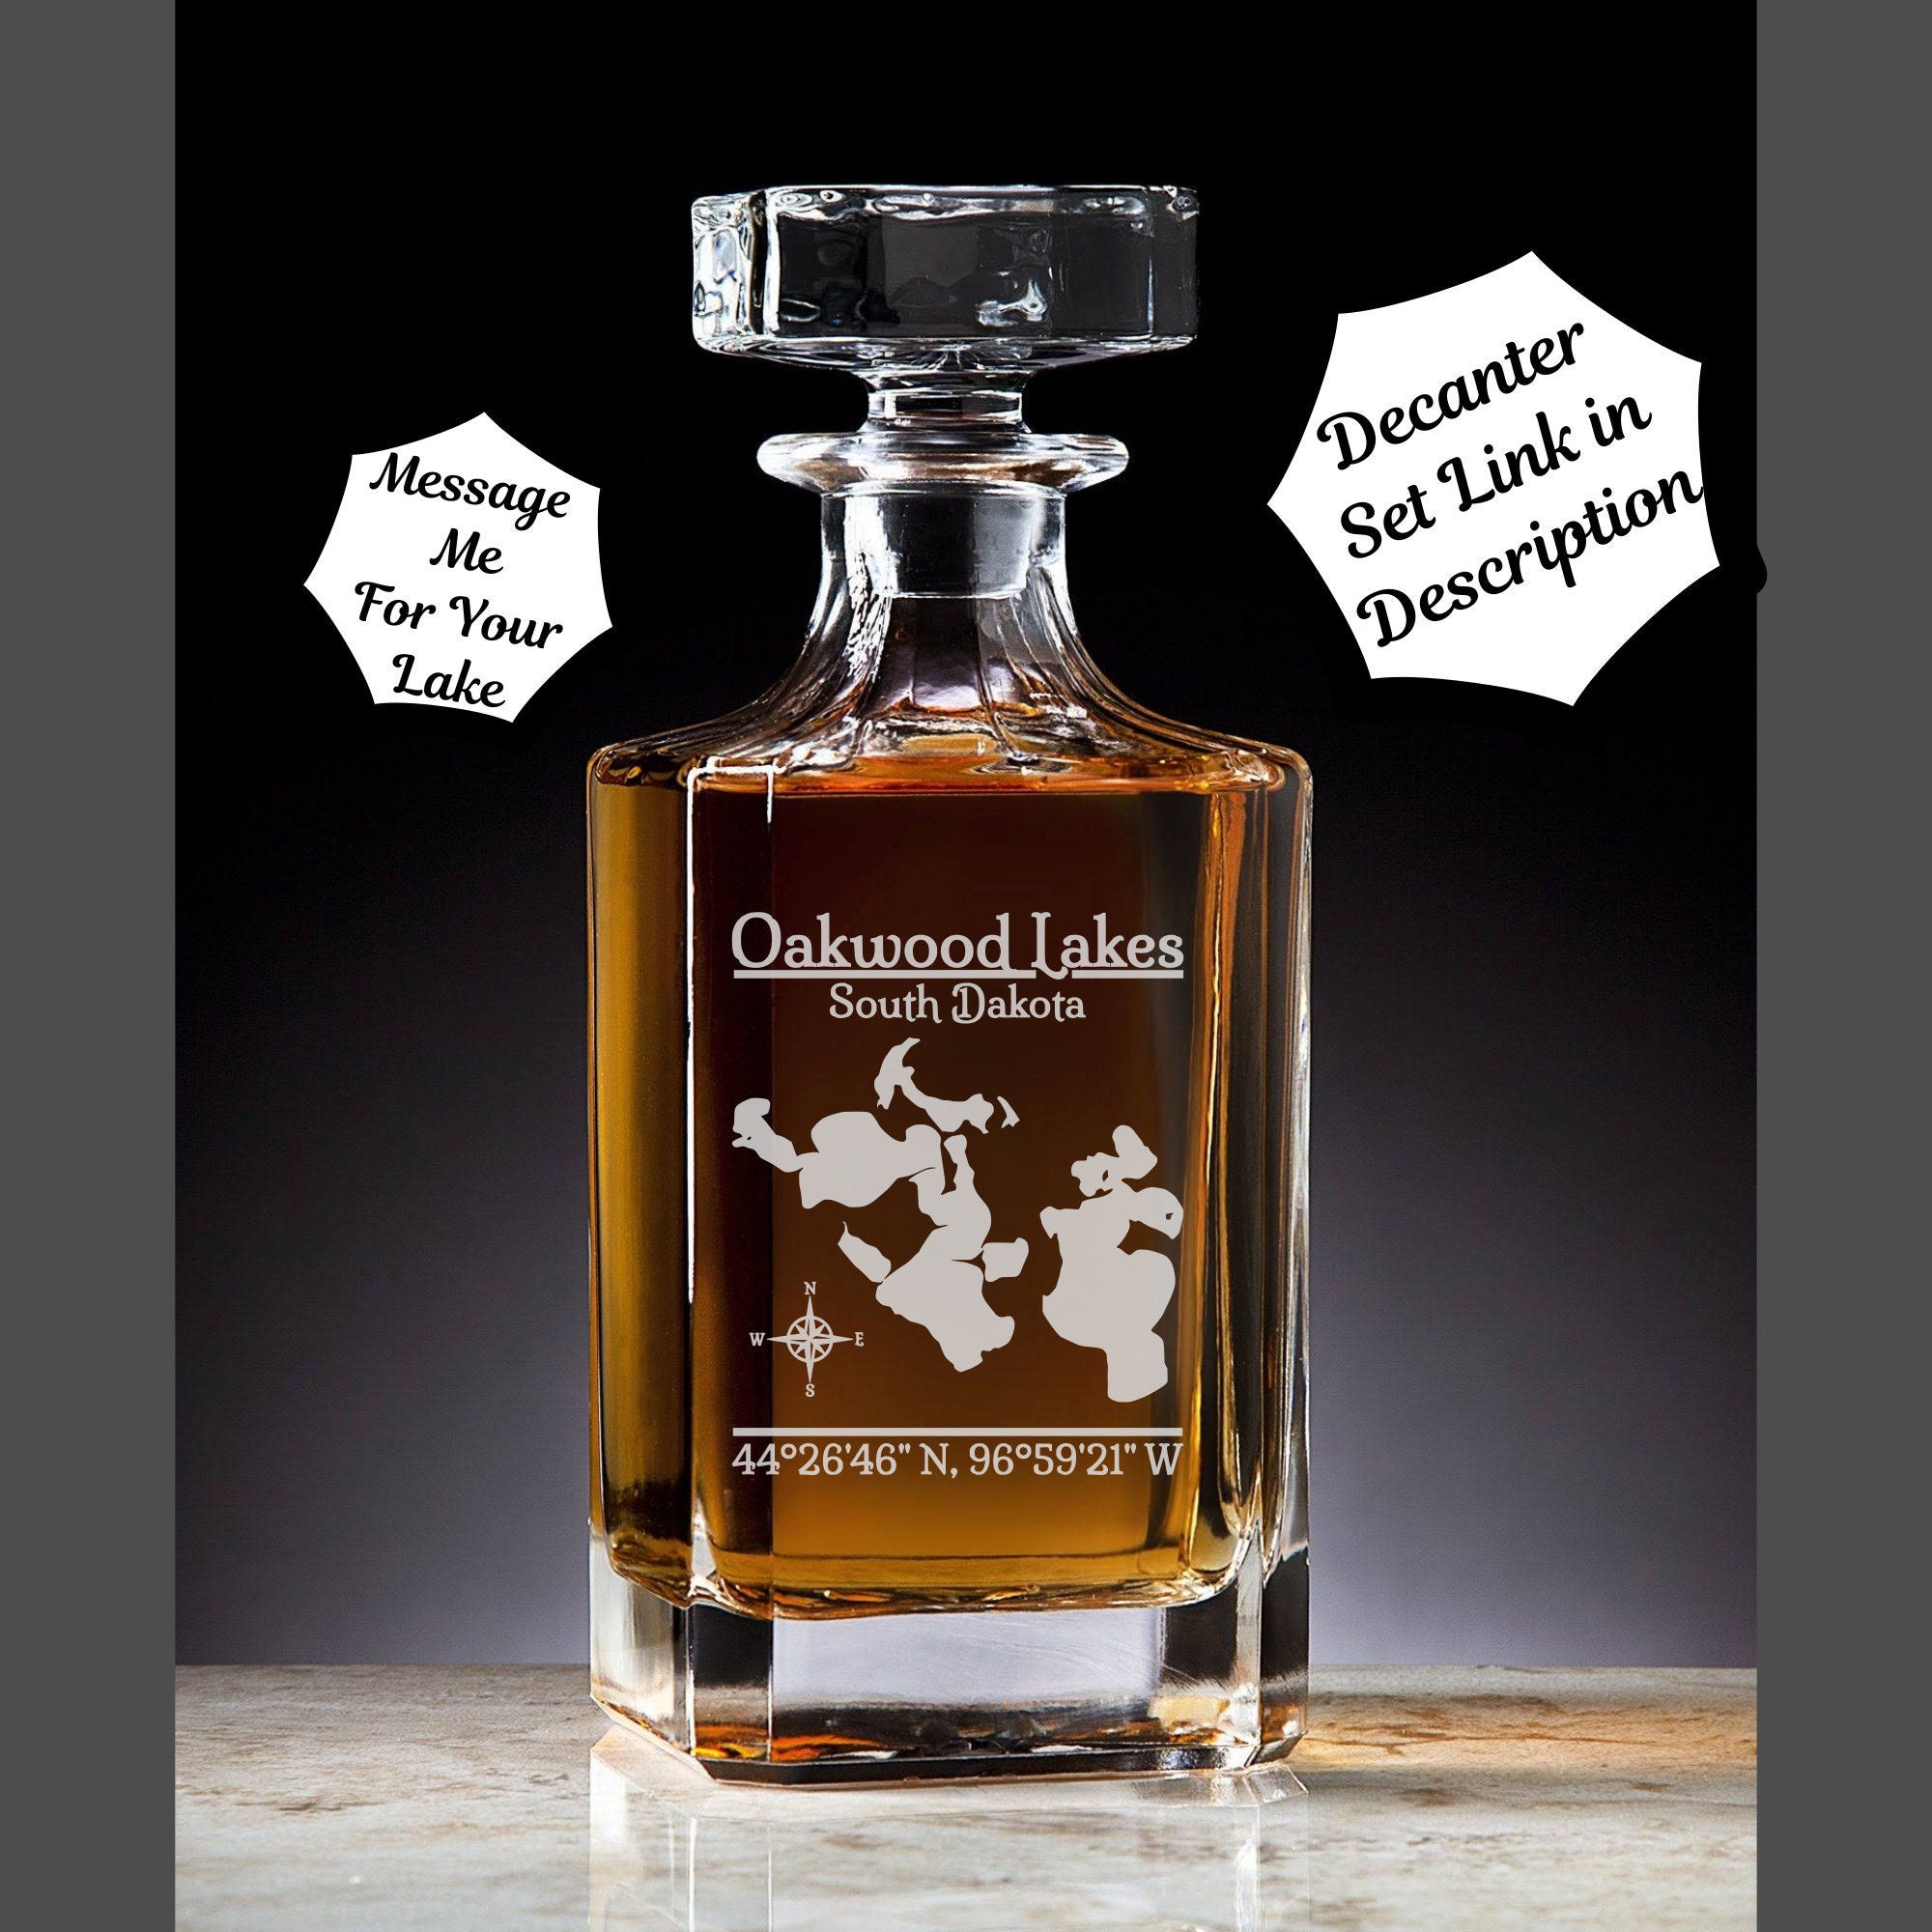 The Lakes Whisky Collection Gift Pack